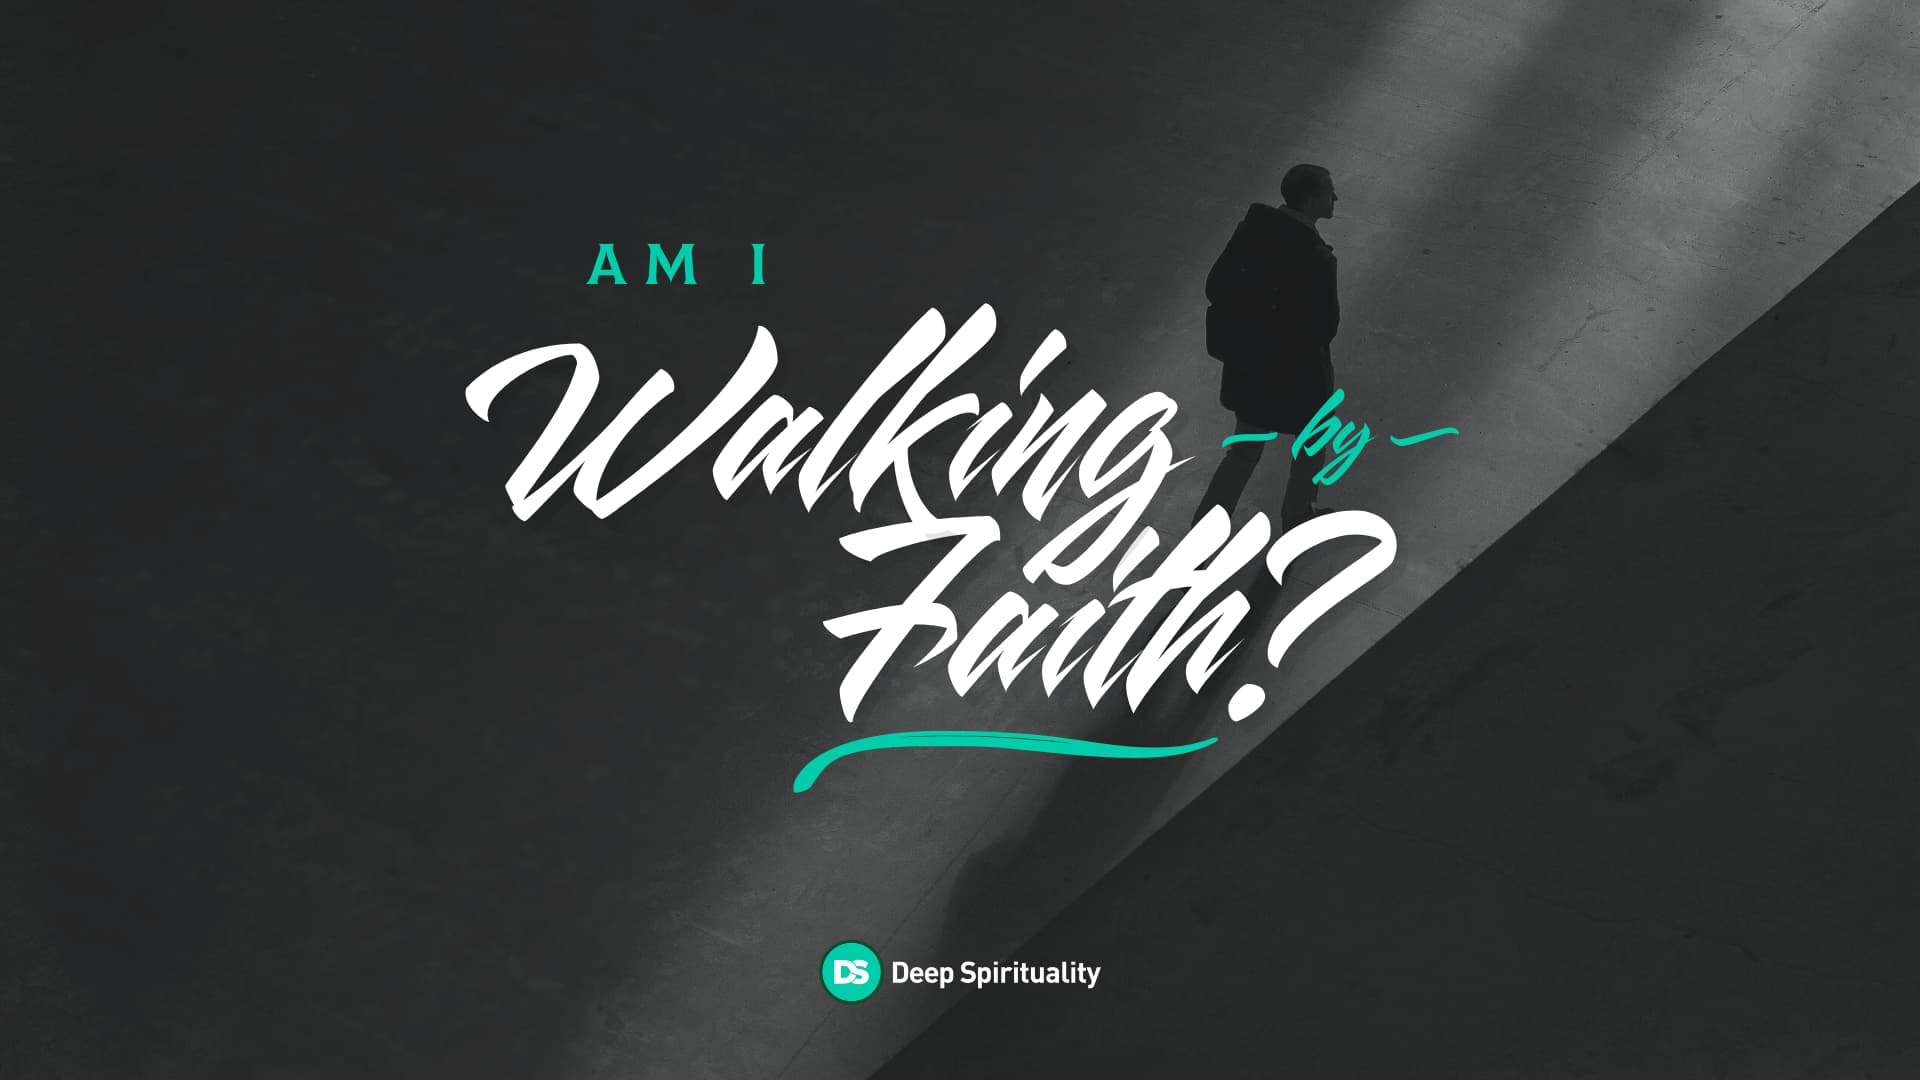 How Do I Know if I’m Walking by Faith? 9